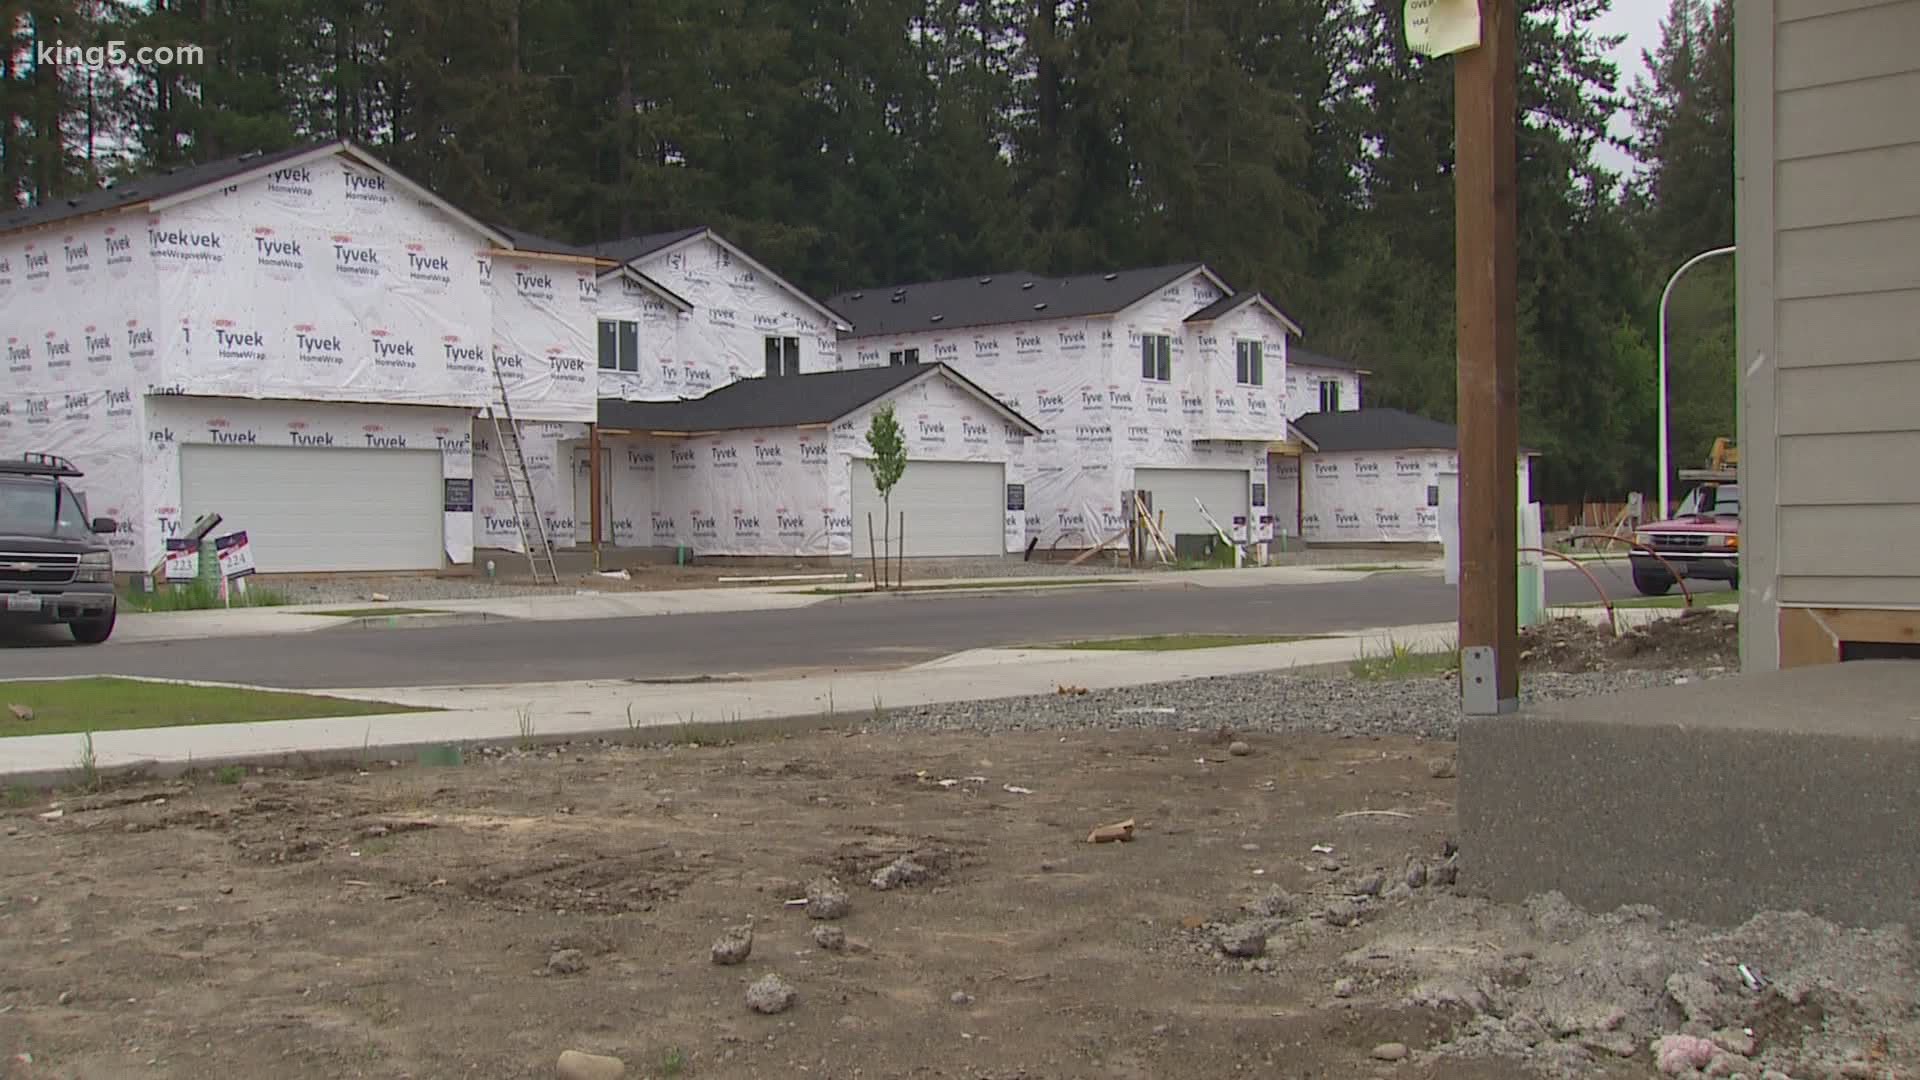 The construction industry and the state of Washington set safety and health protocols for restarting some construction projects during the coronavirus pandemic.